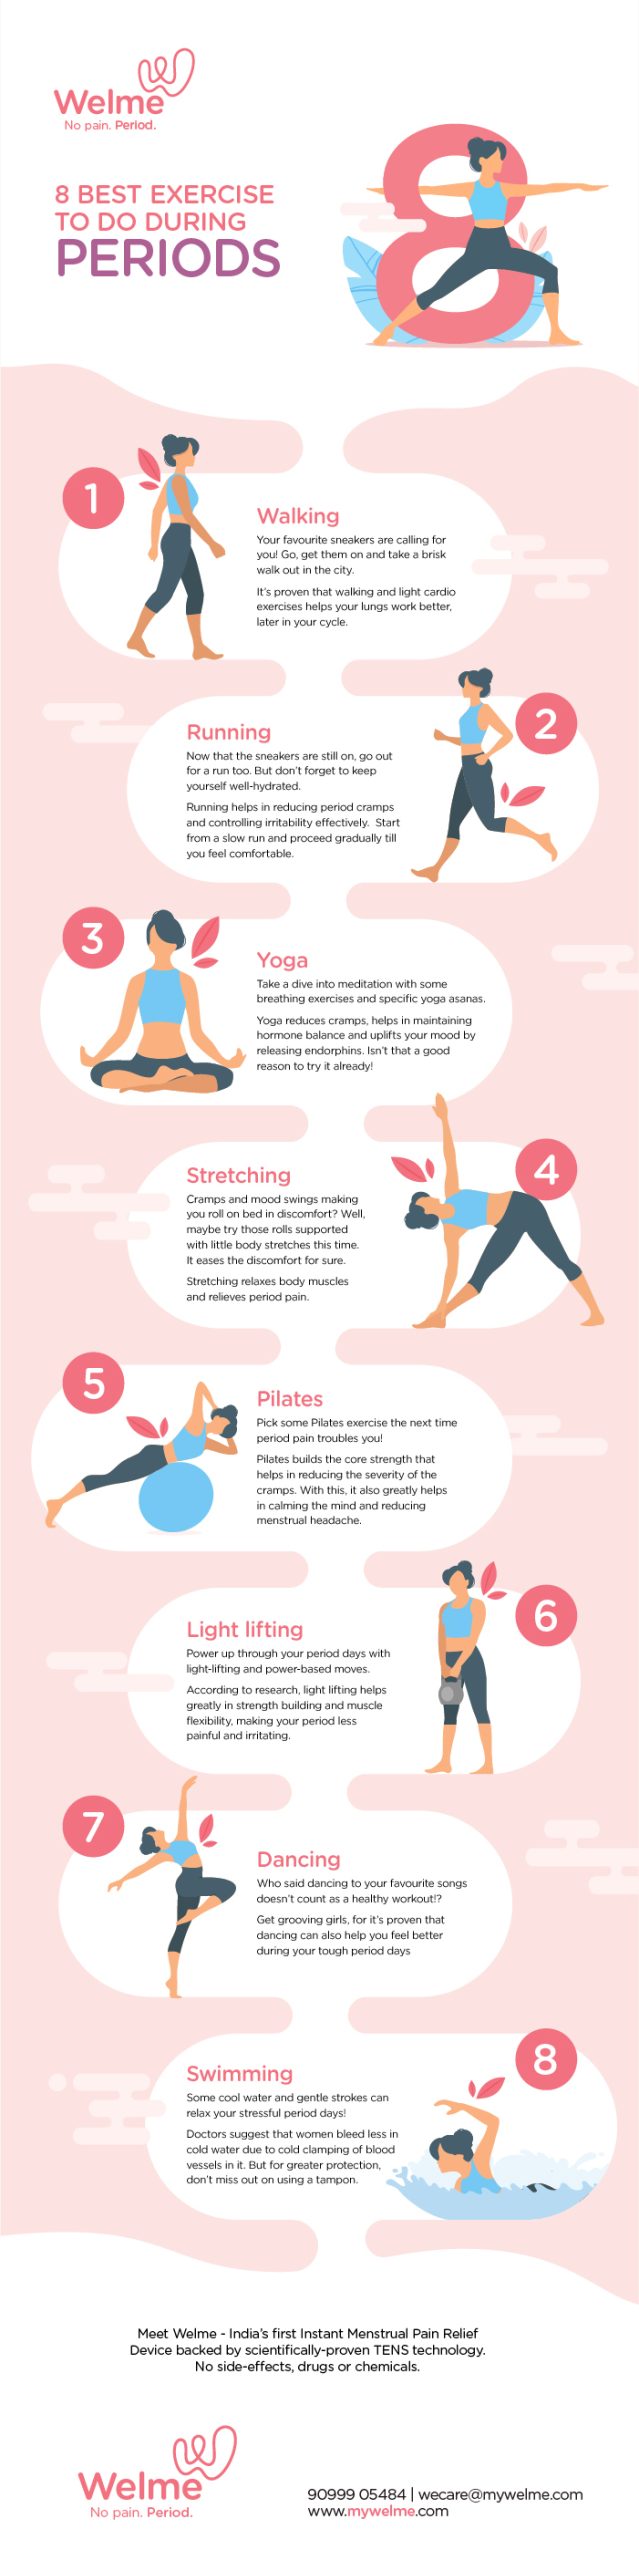 8 Best Exercise To Do During Periods